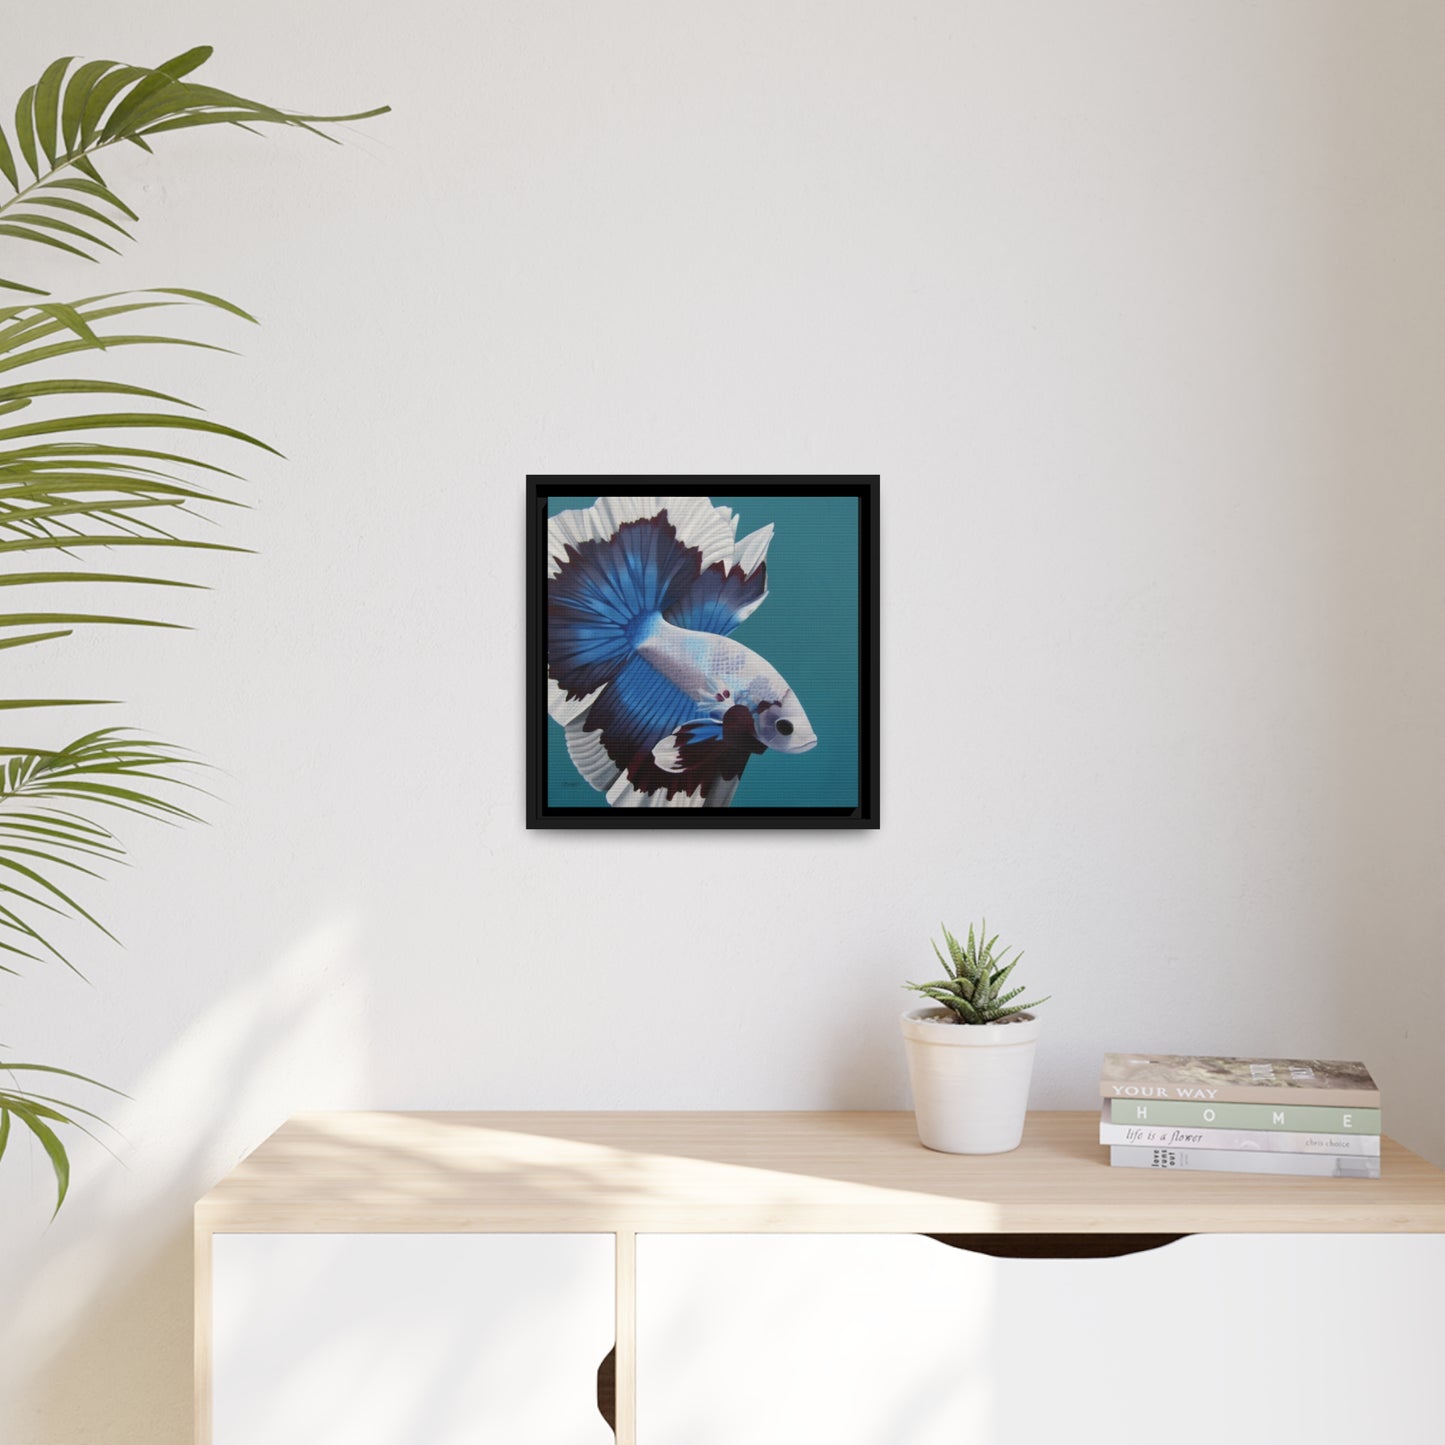 Betta Fish Painting Reproduction: The Stunning and Eco-Friendly Wall Art for Your Home